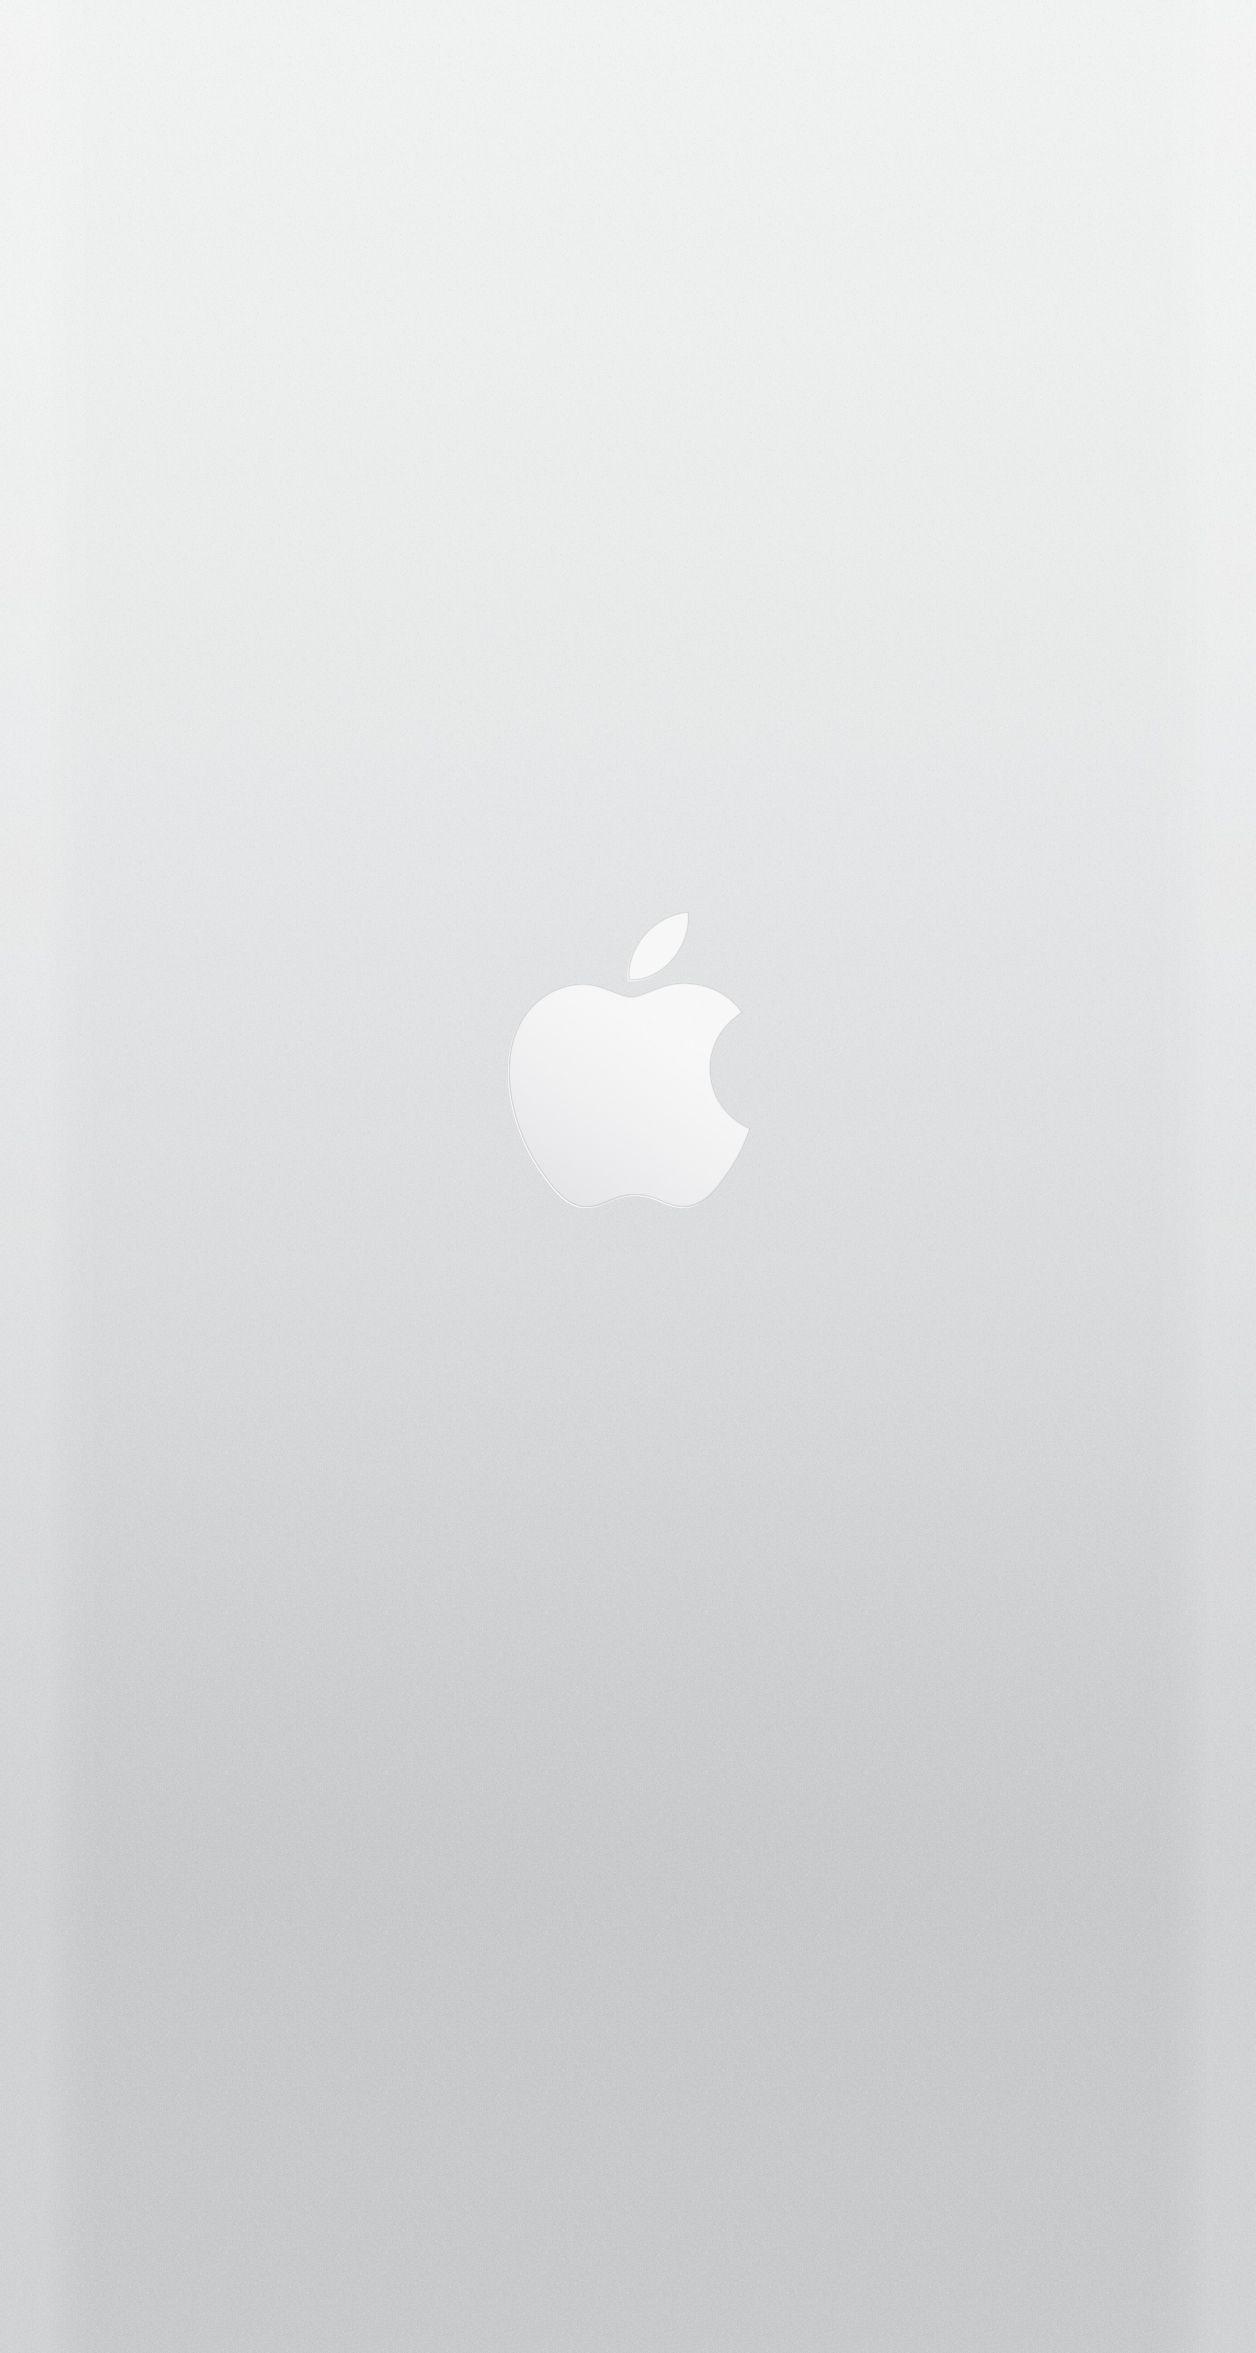 Silver 6 Logo - Apple logo wallpapers for iPhone 6